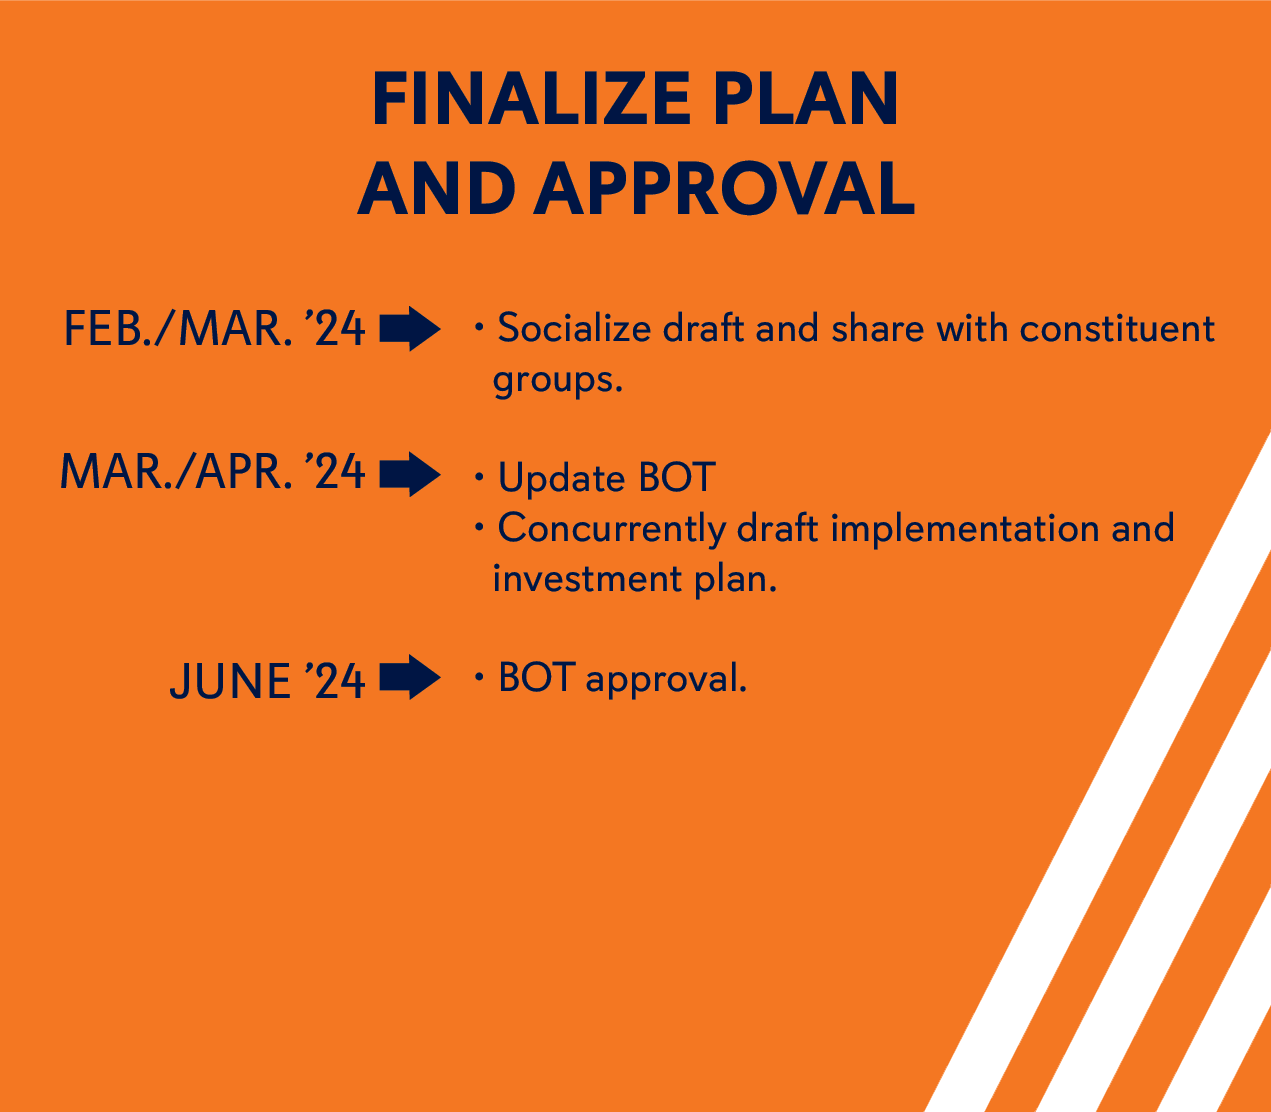 Finalize Plan And Approval - Feb/Mar - Socialize draft and share with constituent groups 2. Mar/Apr Update BOT, Concurrently draft implementation and investment plan 3. June 24 BOT approval